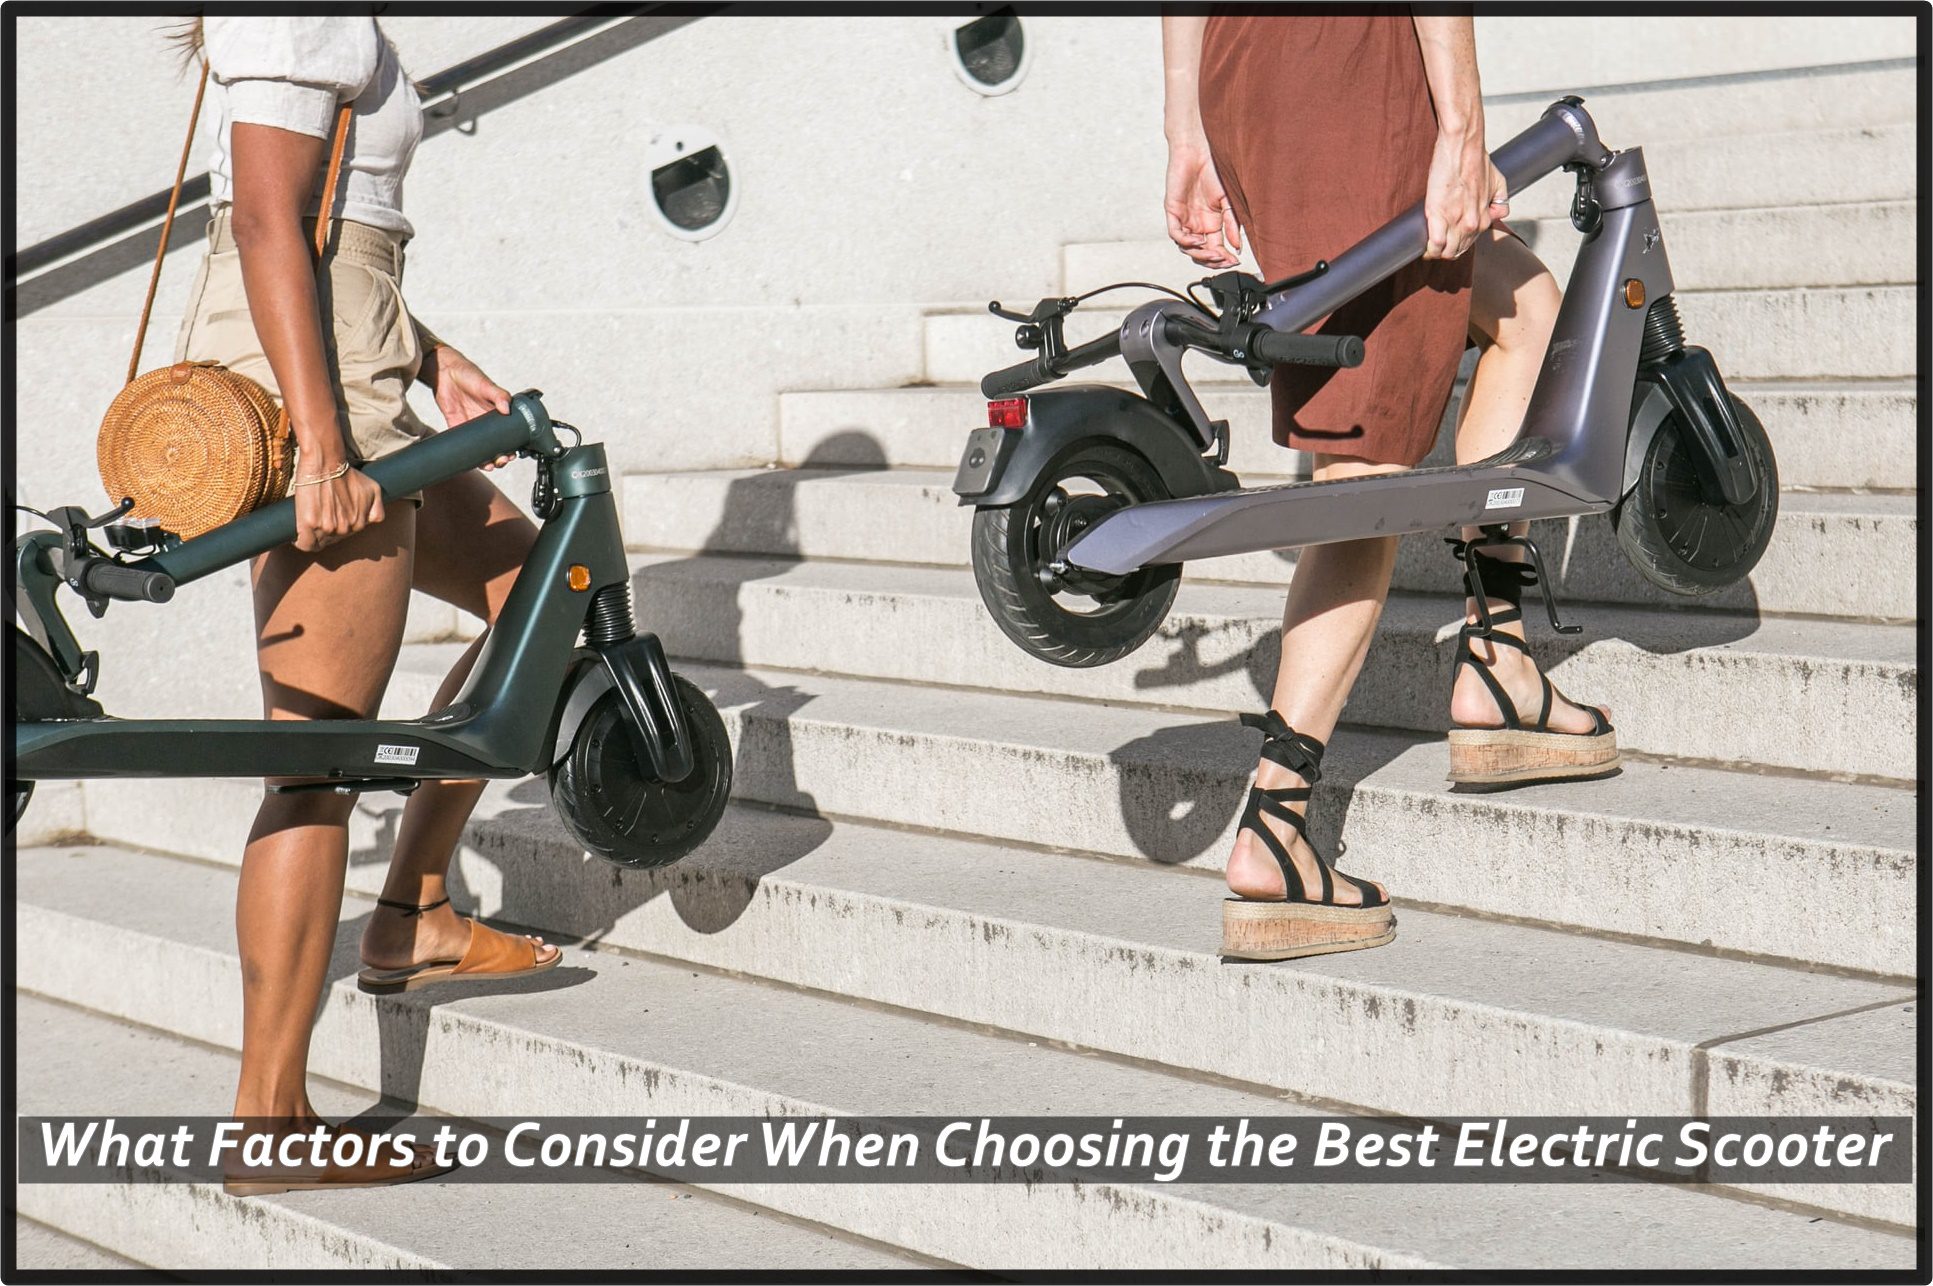 What Factors to Consider When Choosing the Best Electric Scooter